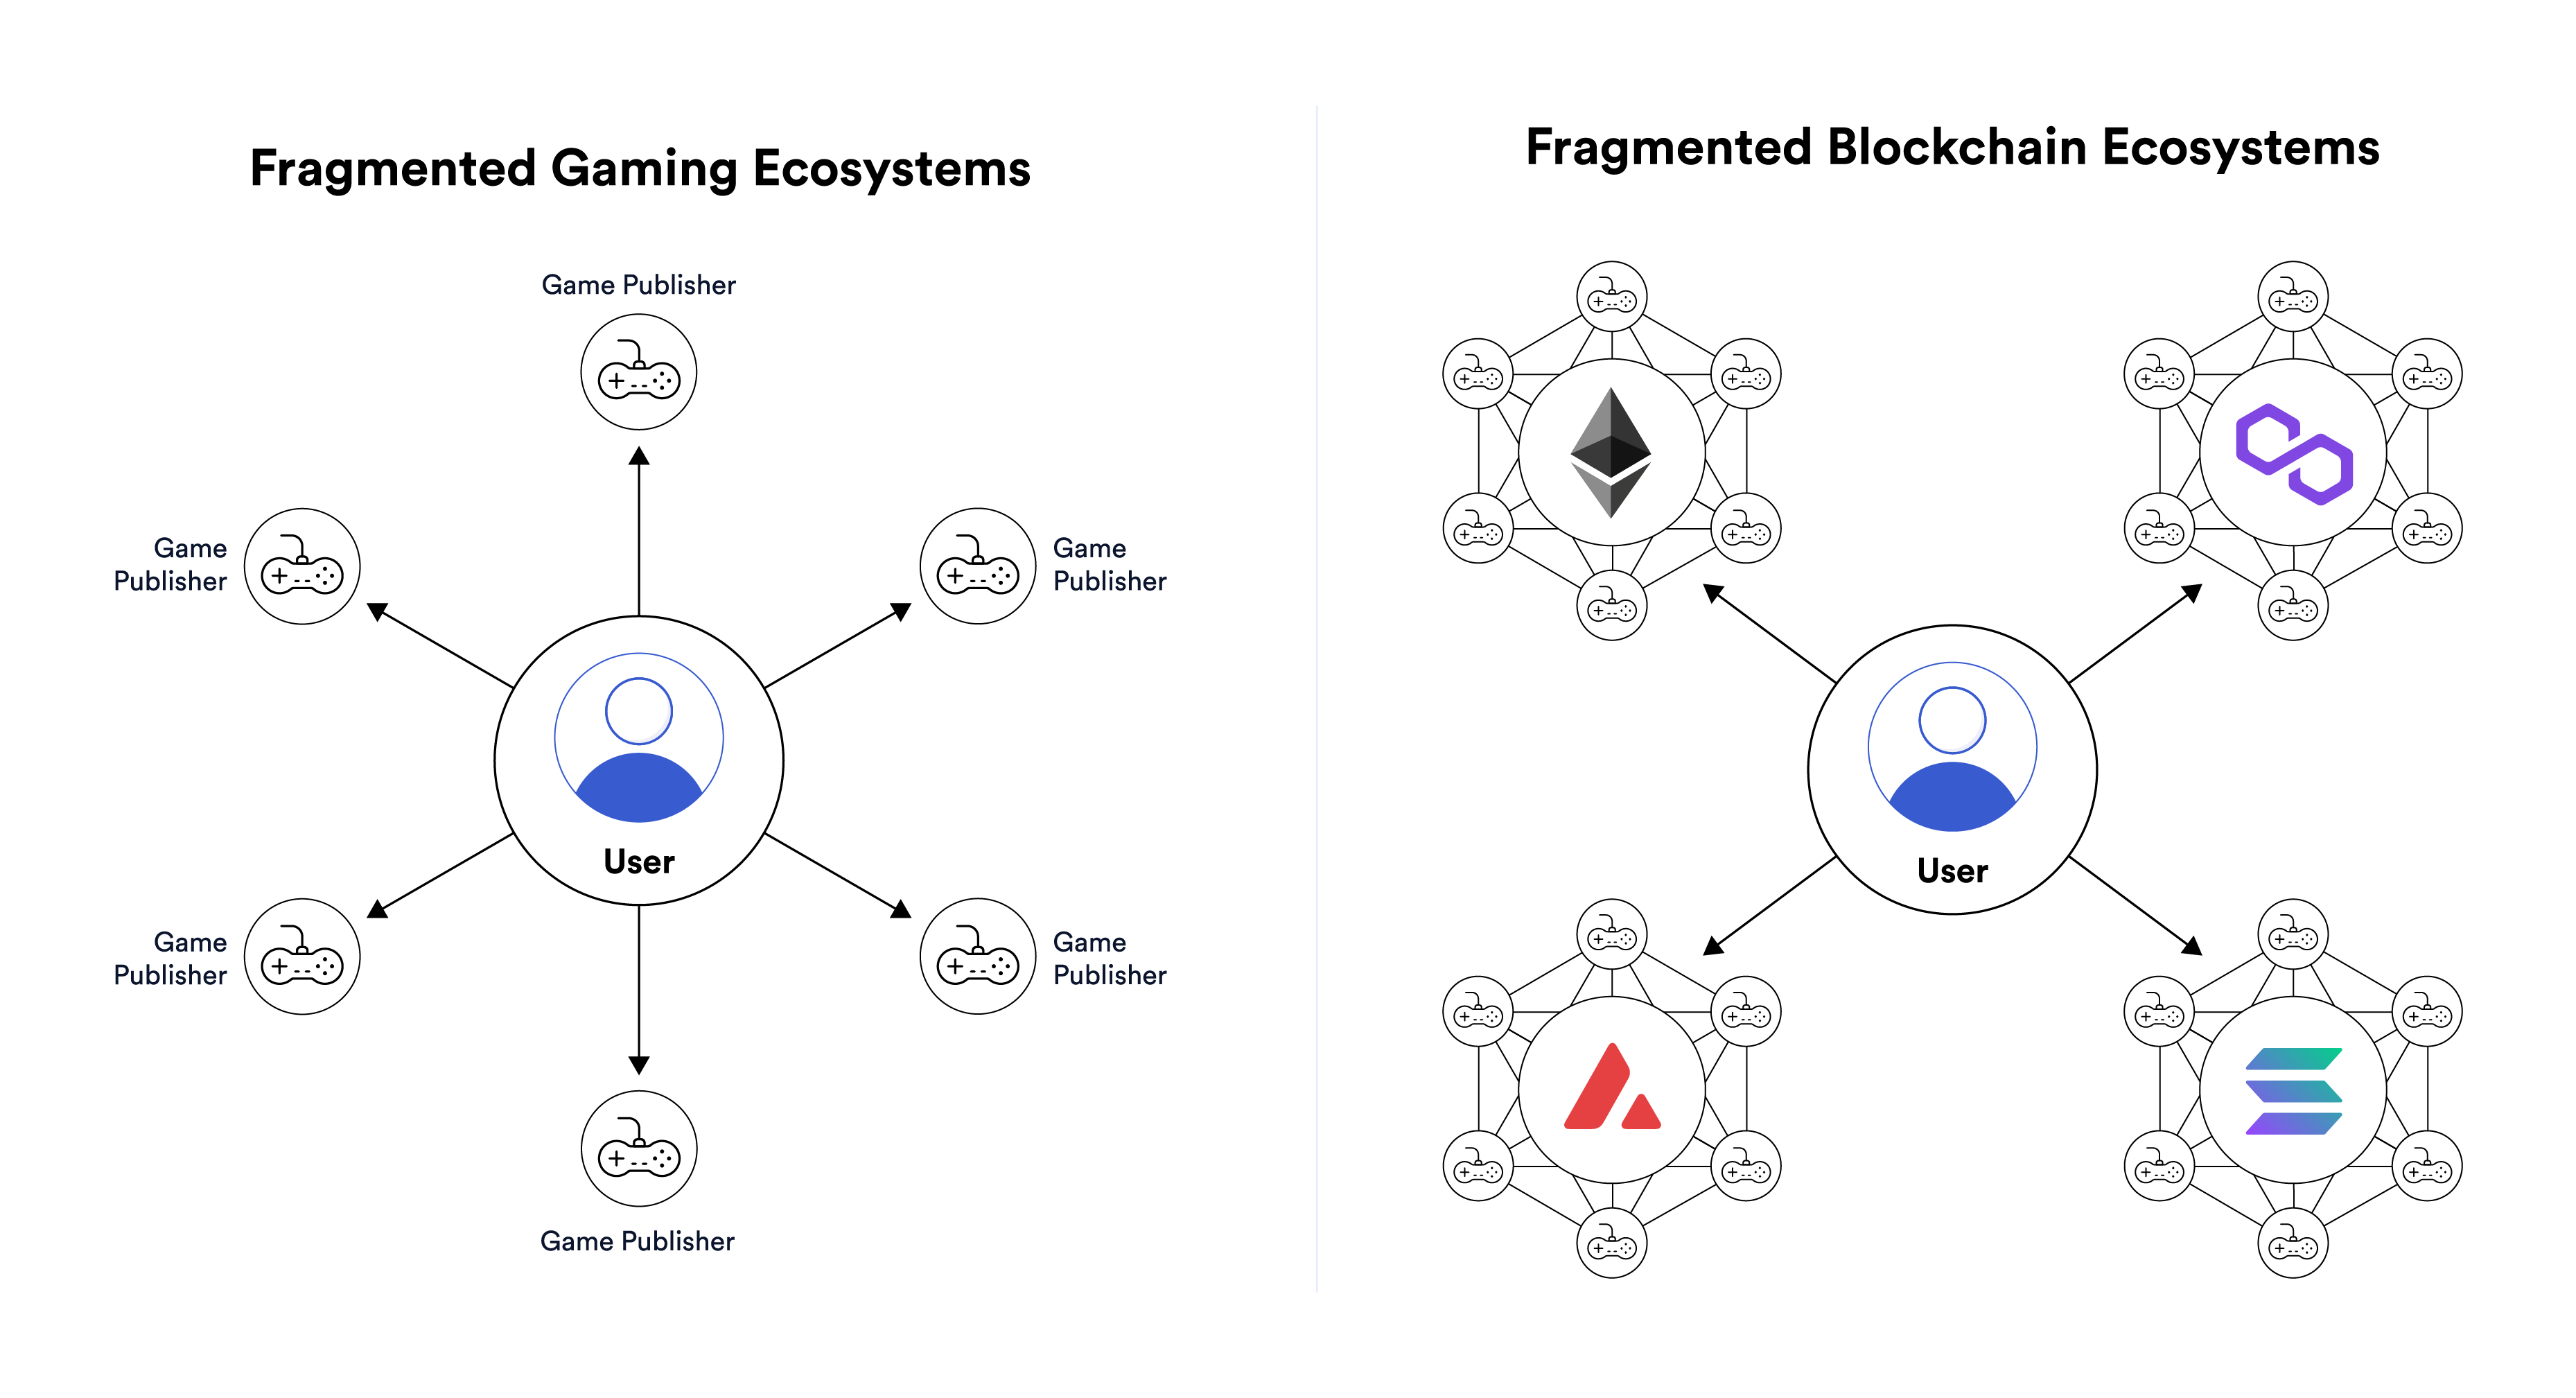 A diagram showing how blockchain fragmentation mimics gaming ecosystems today.